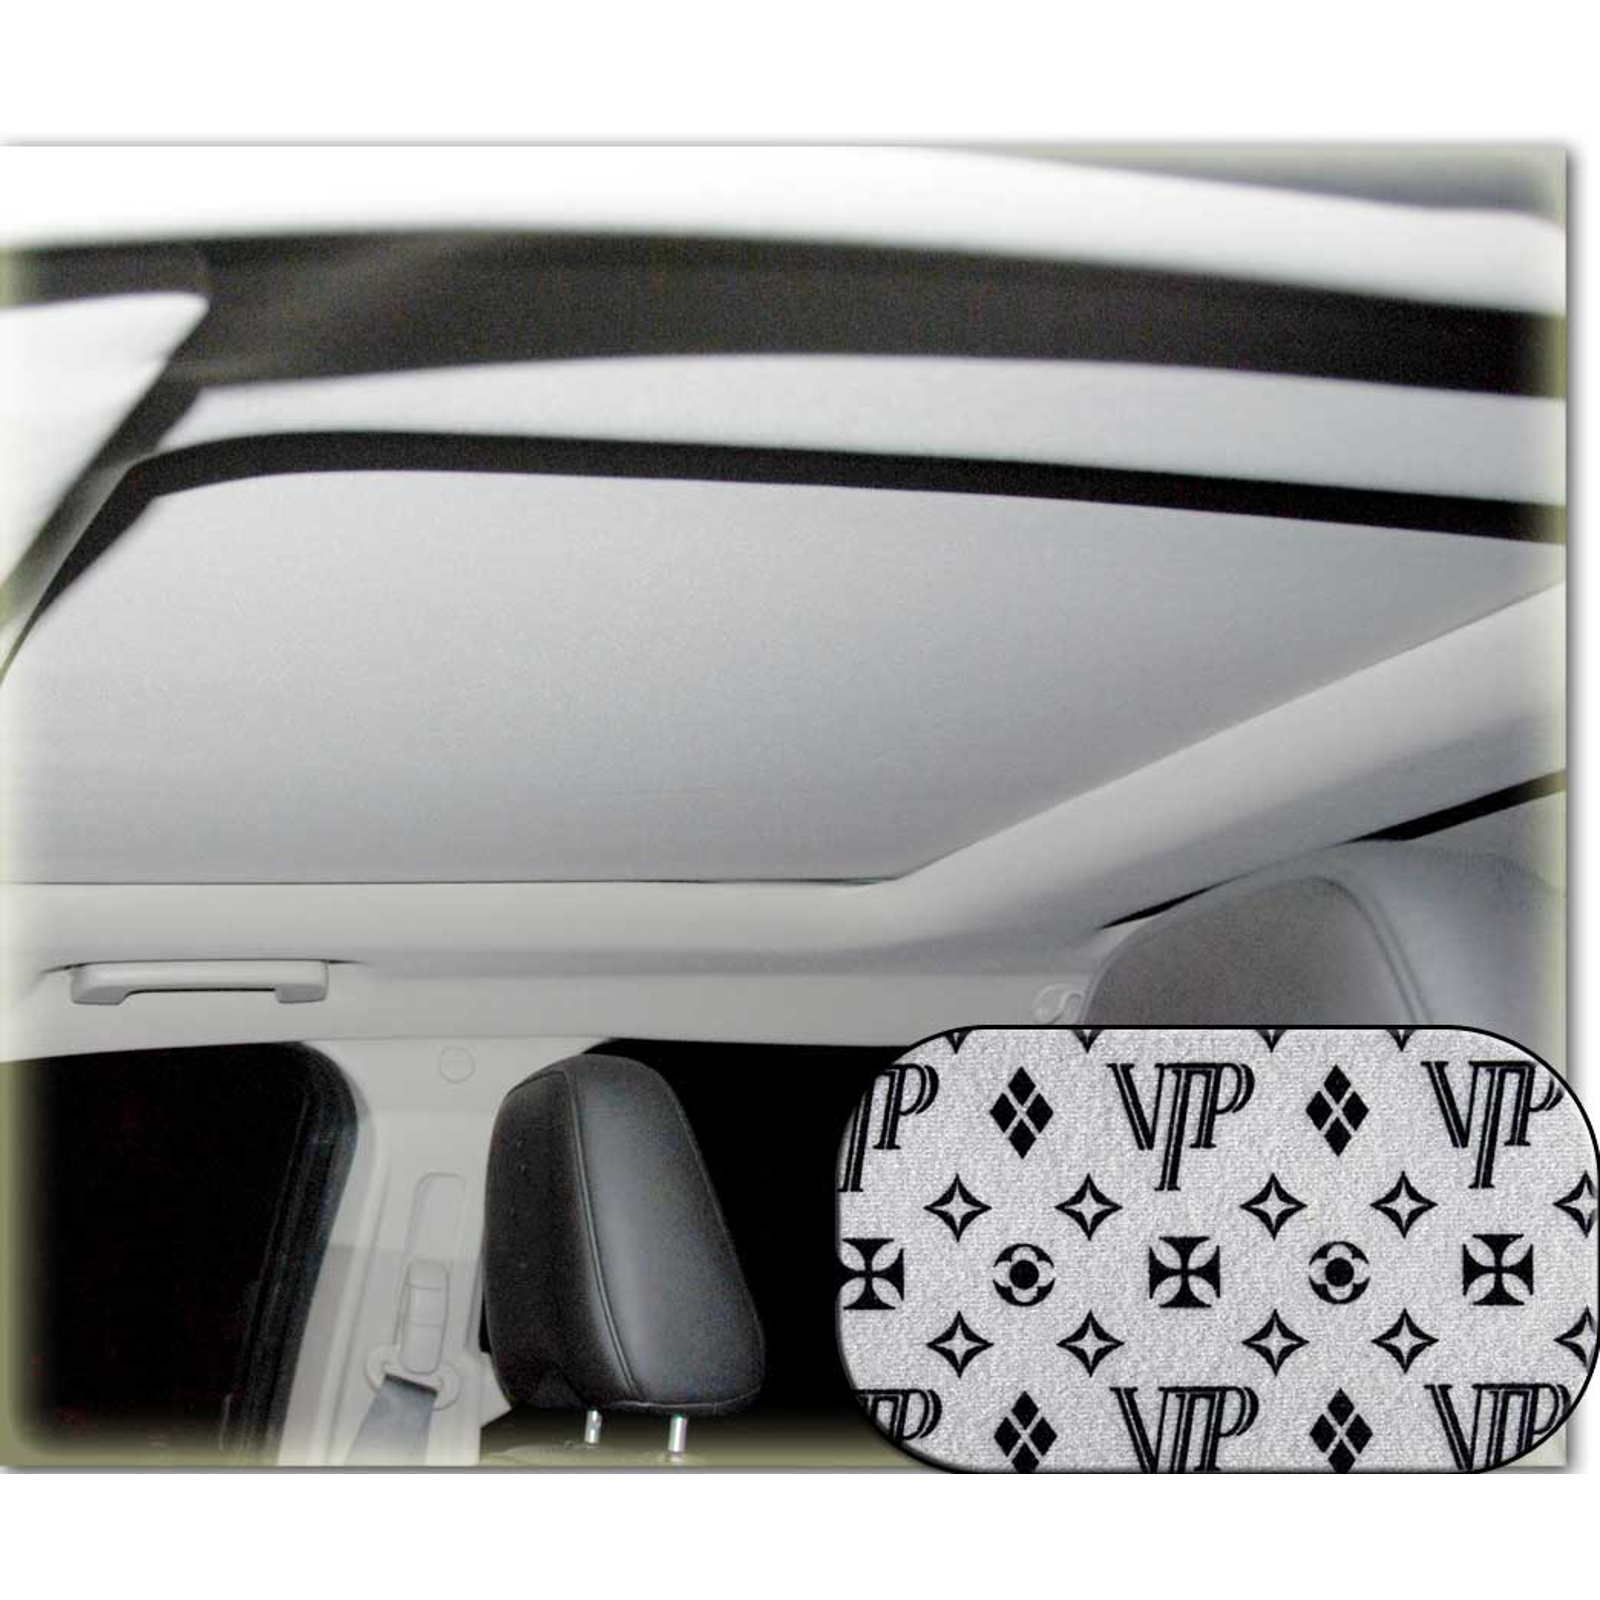 VIP Sun Roof Panel Recover Kit